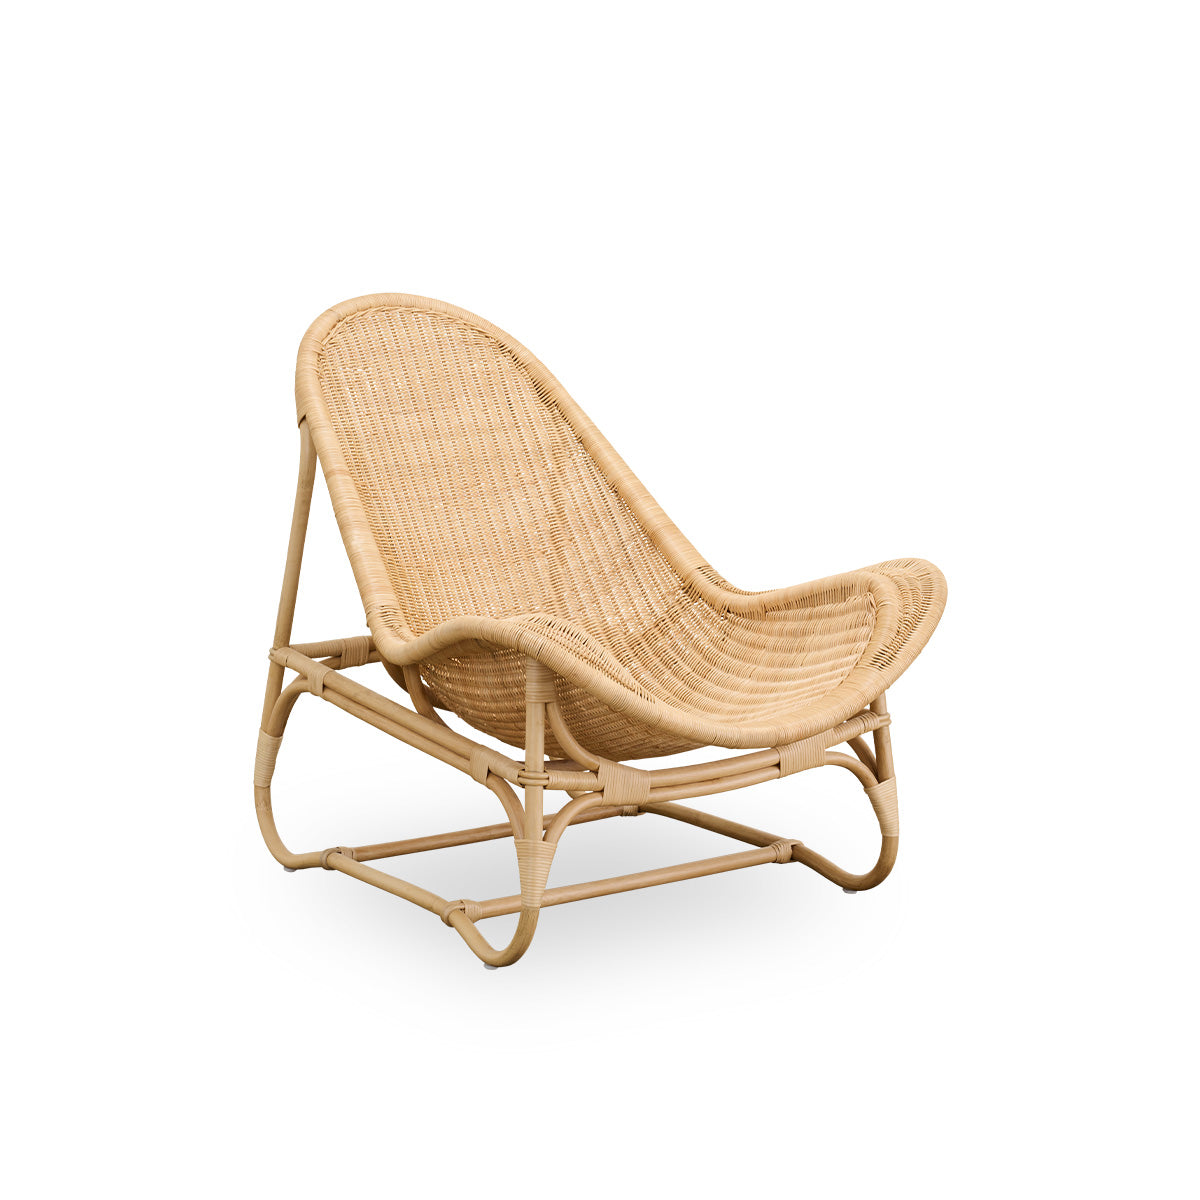 Pacifique Lounge Chair by Sika